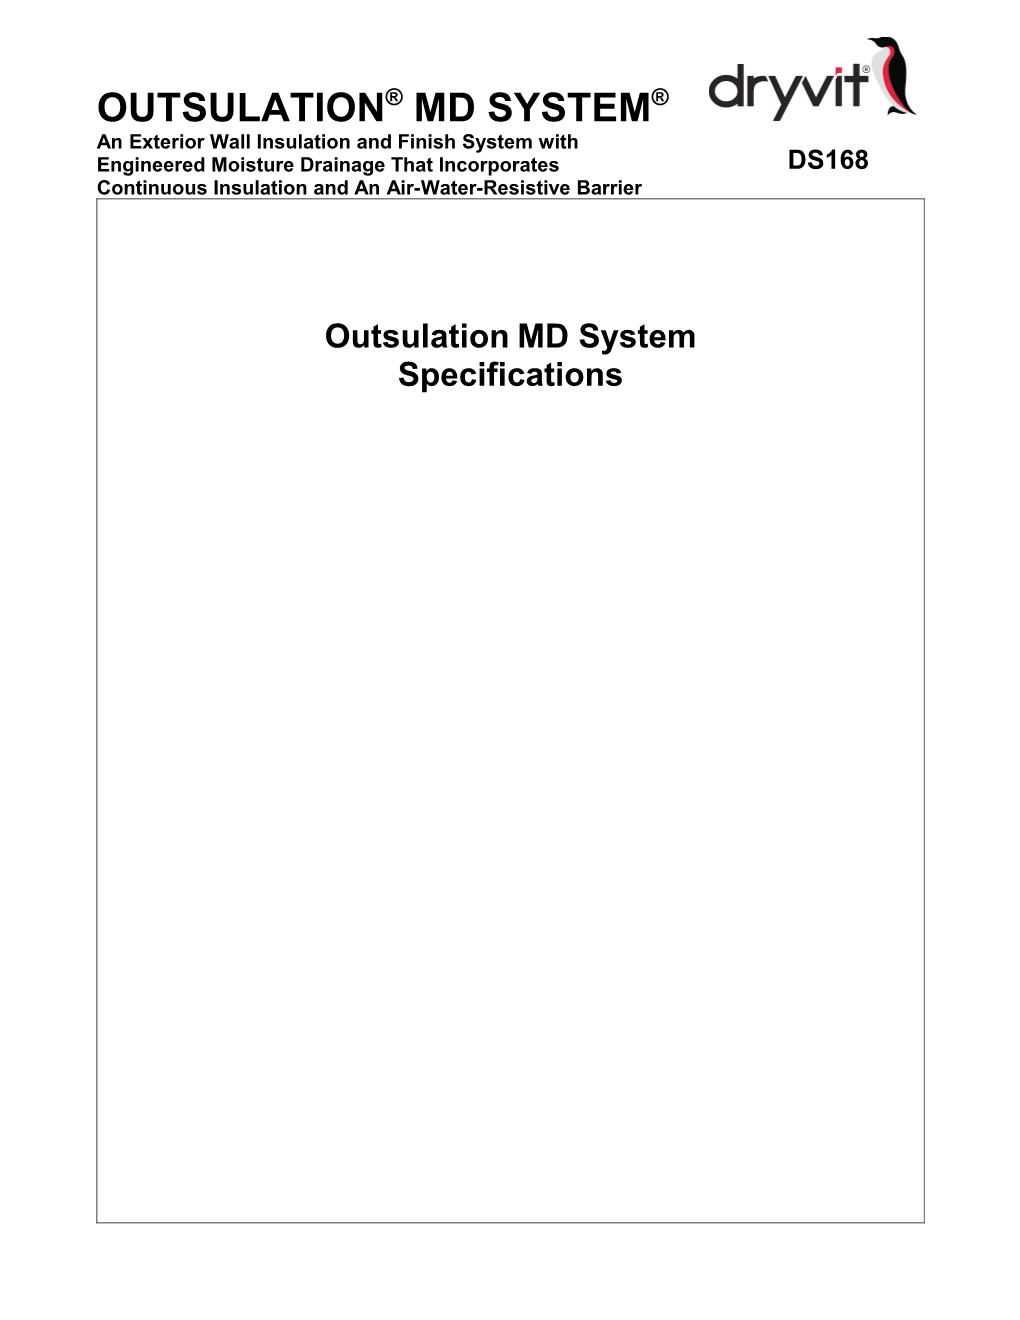 Outsulation MD System Specifications - DS168